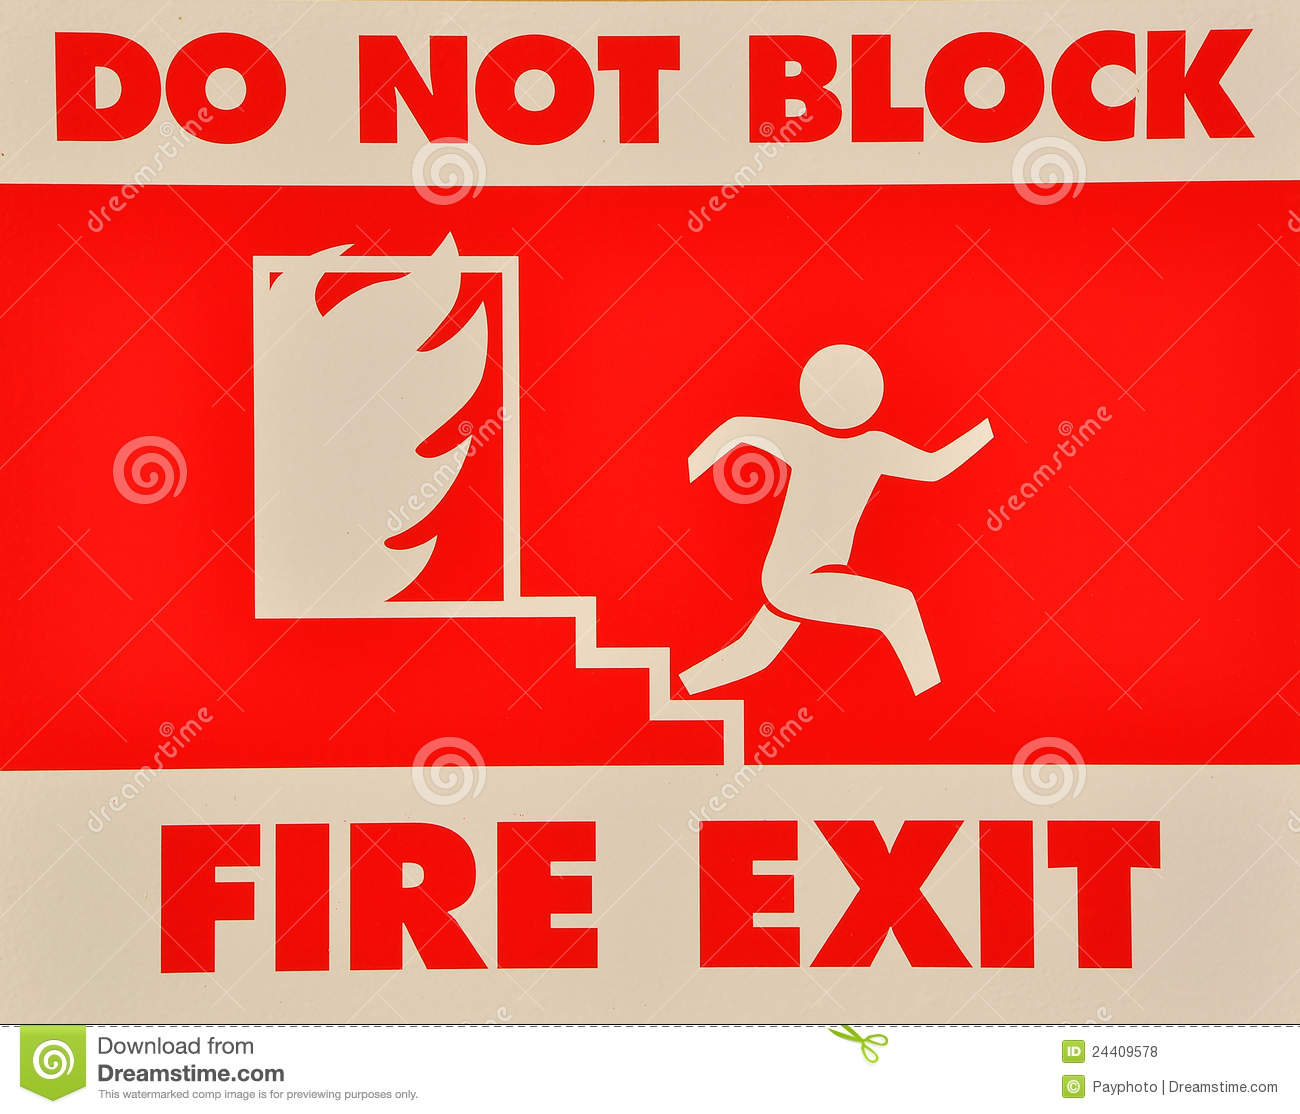 Do Not Block Fire Exit Sign Royalty Free Stock Photos   Image